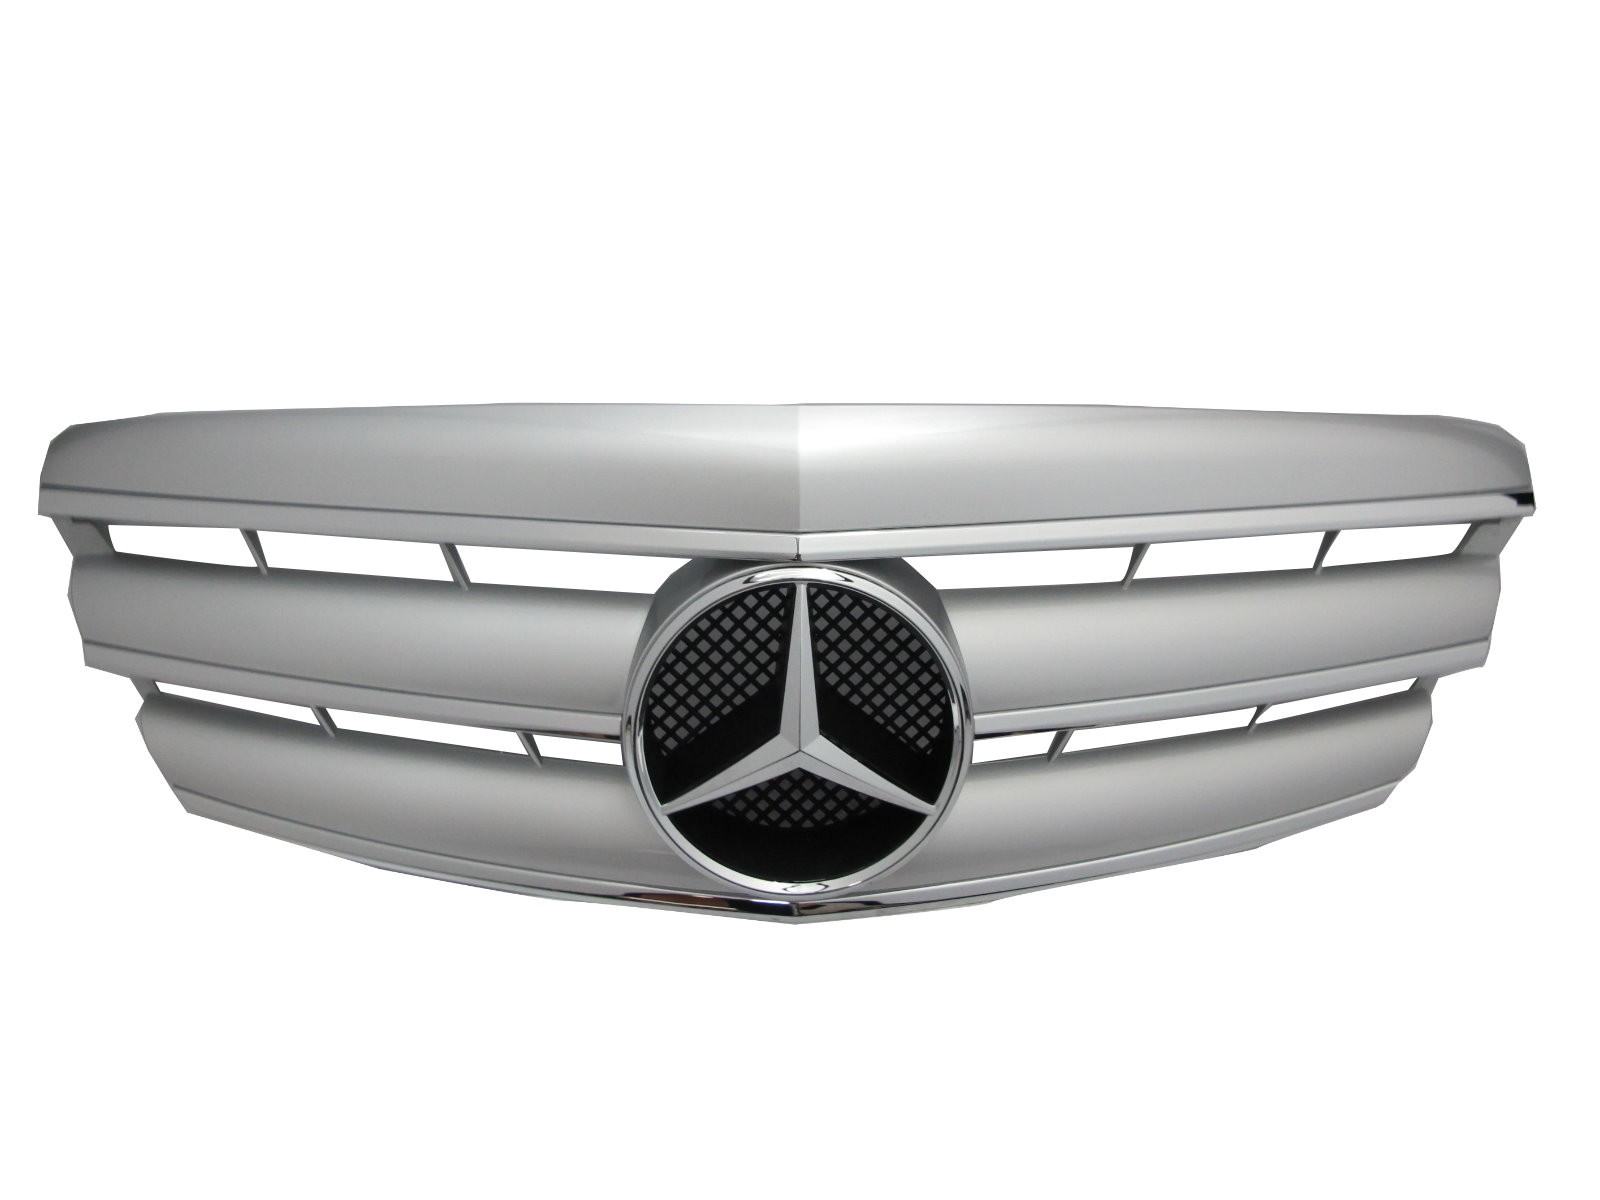 CrazyTheGod S-CLASS W221 2006-2009 PRE-FACELIFT Sedan 4D 3FIN GRILLE/GRILL Chrome/Silver for Mercedes-Benz